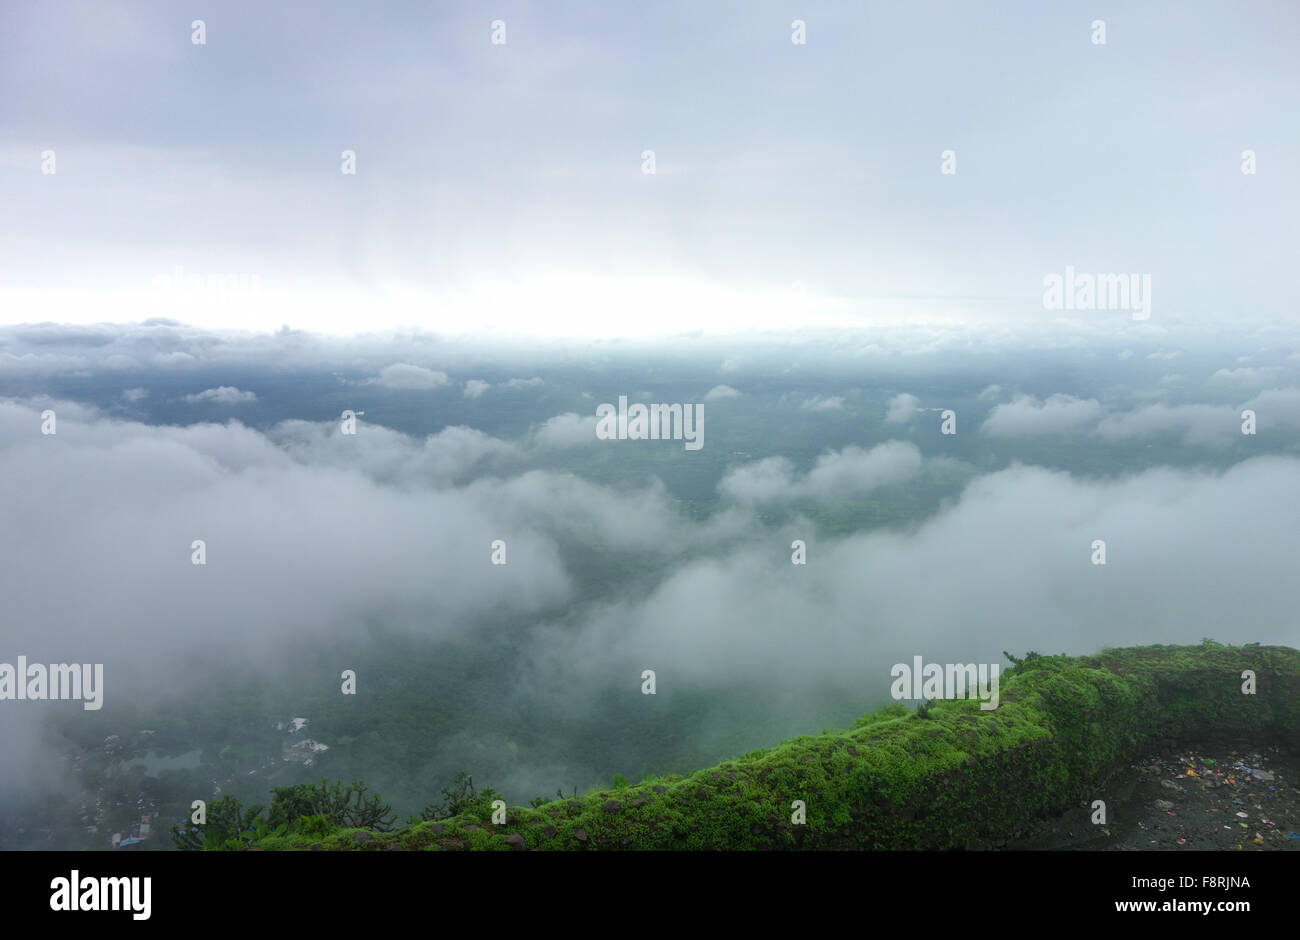 View from the top of Pavagadh Hill in Monsoon season Champaner-Pavagadh ...